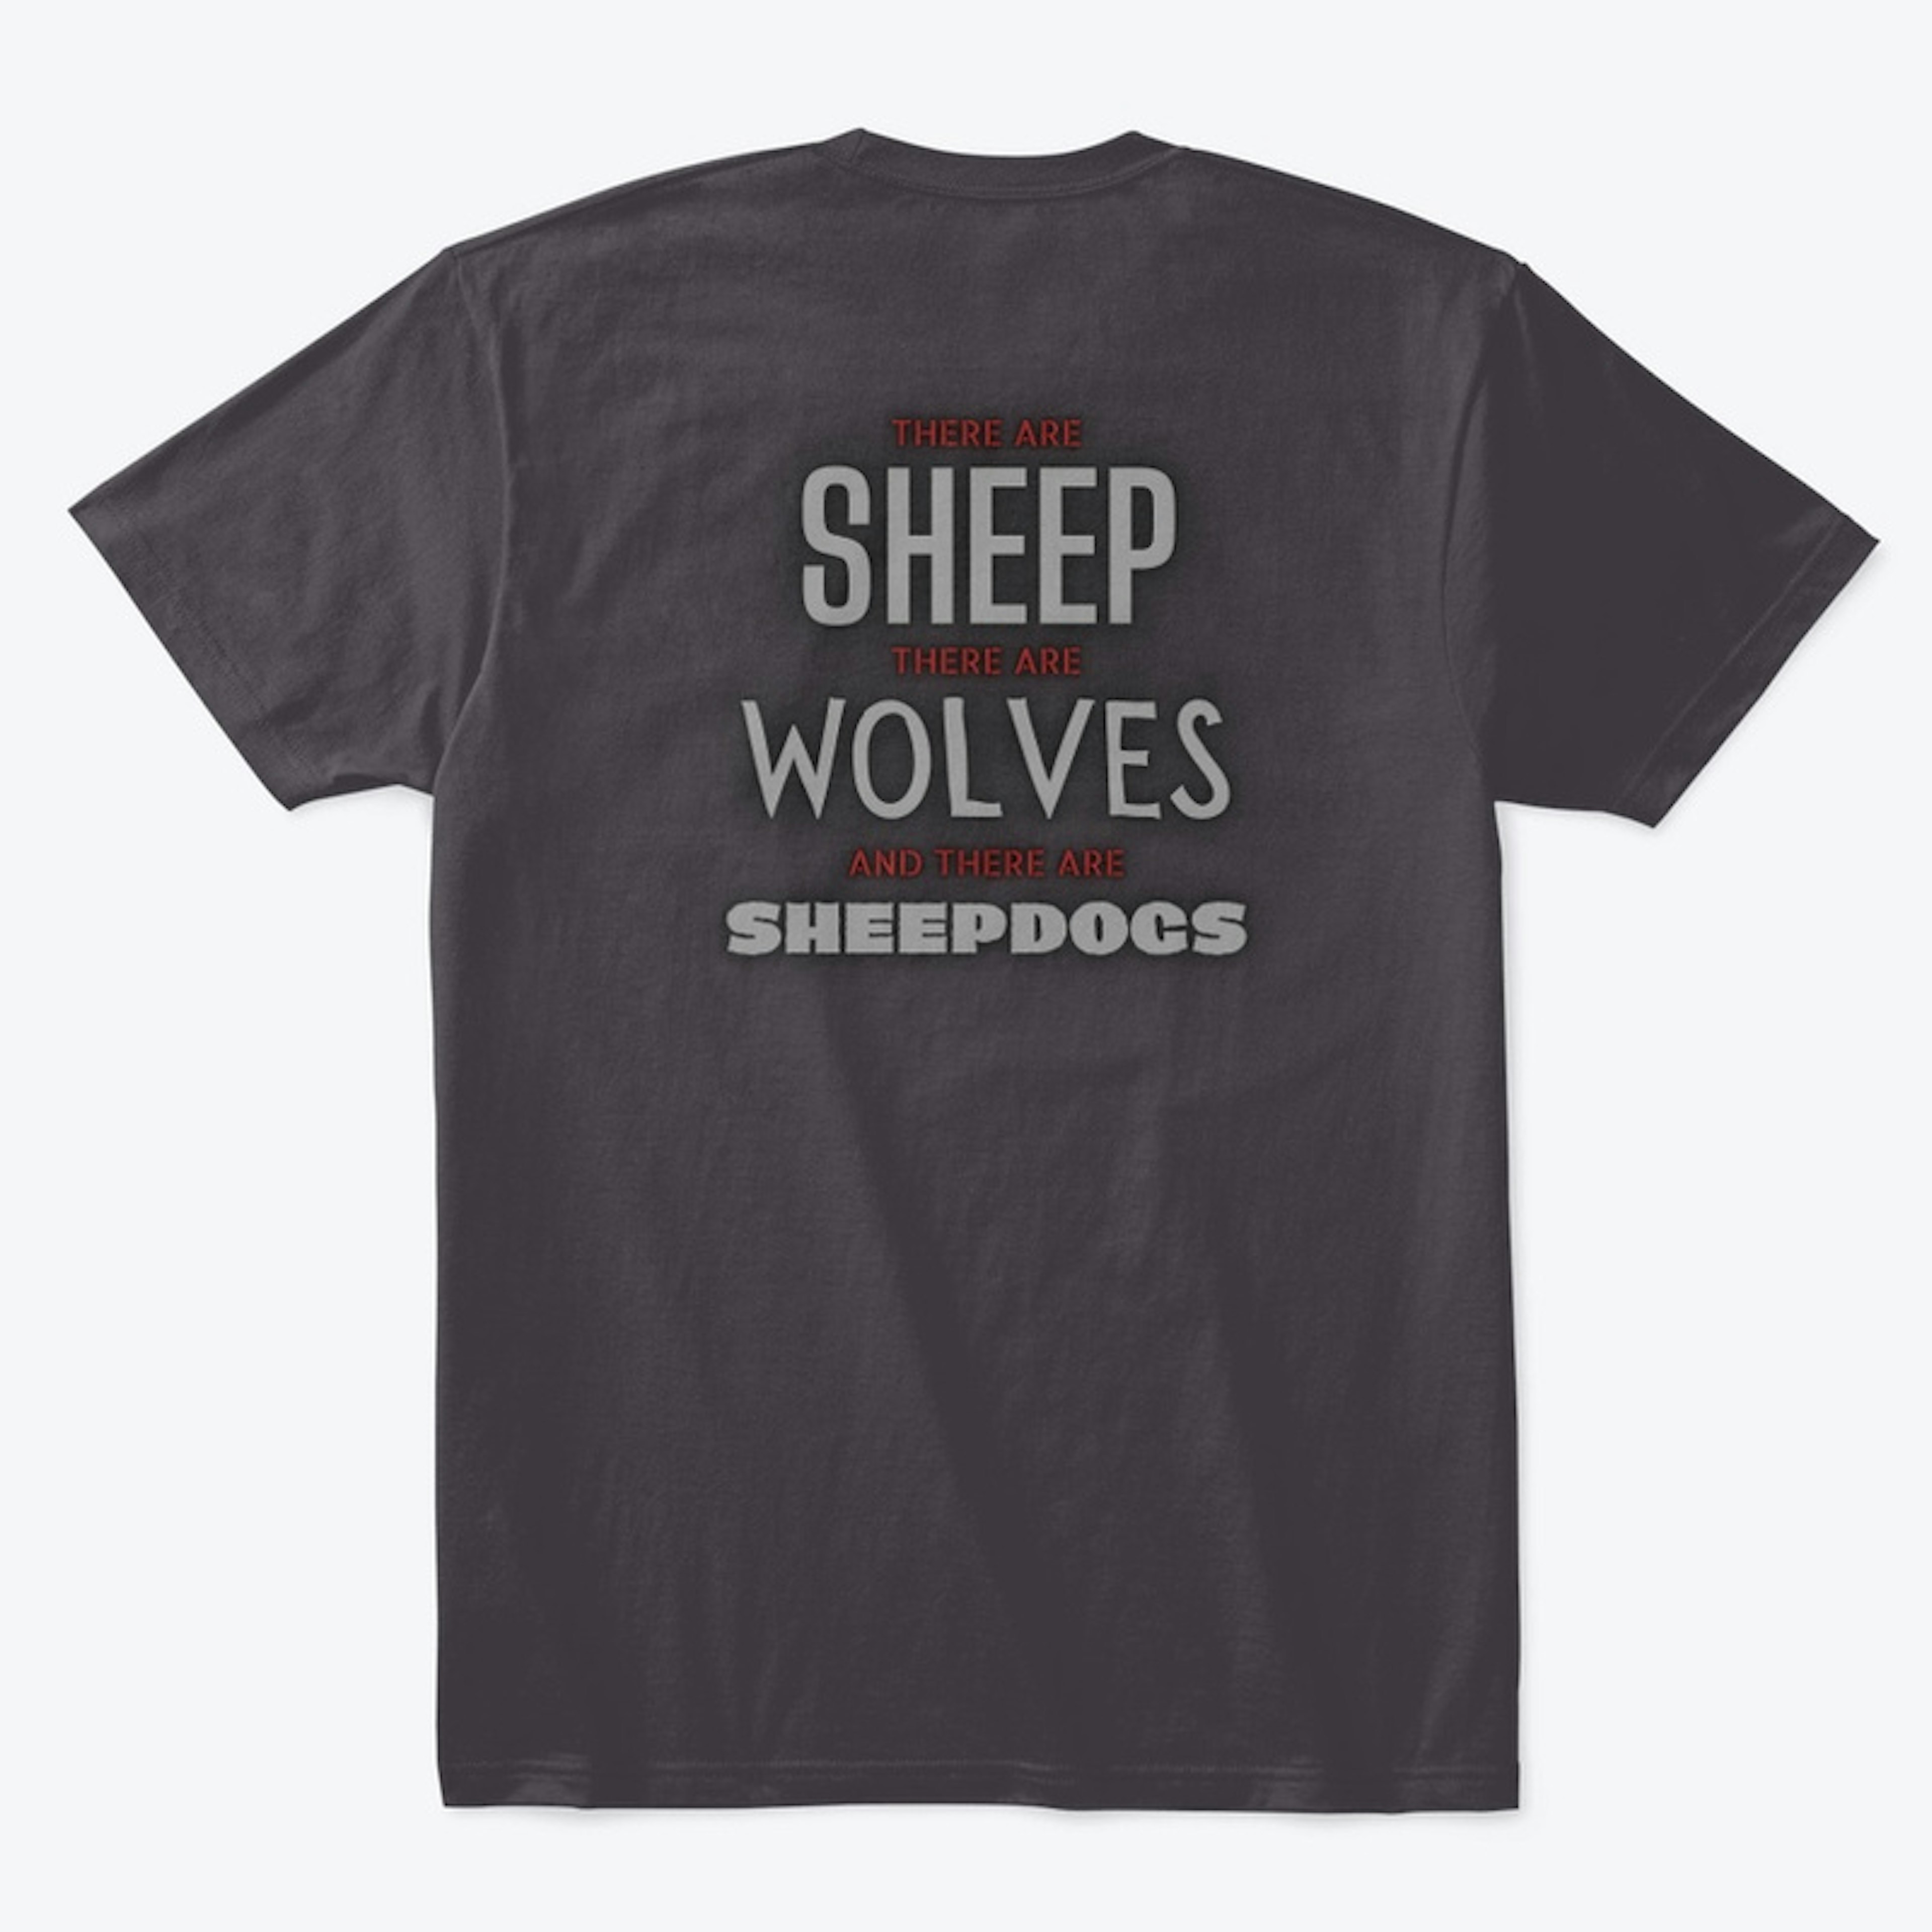 Sheep, Wolves, and Sheepdogs